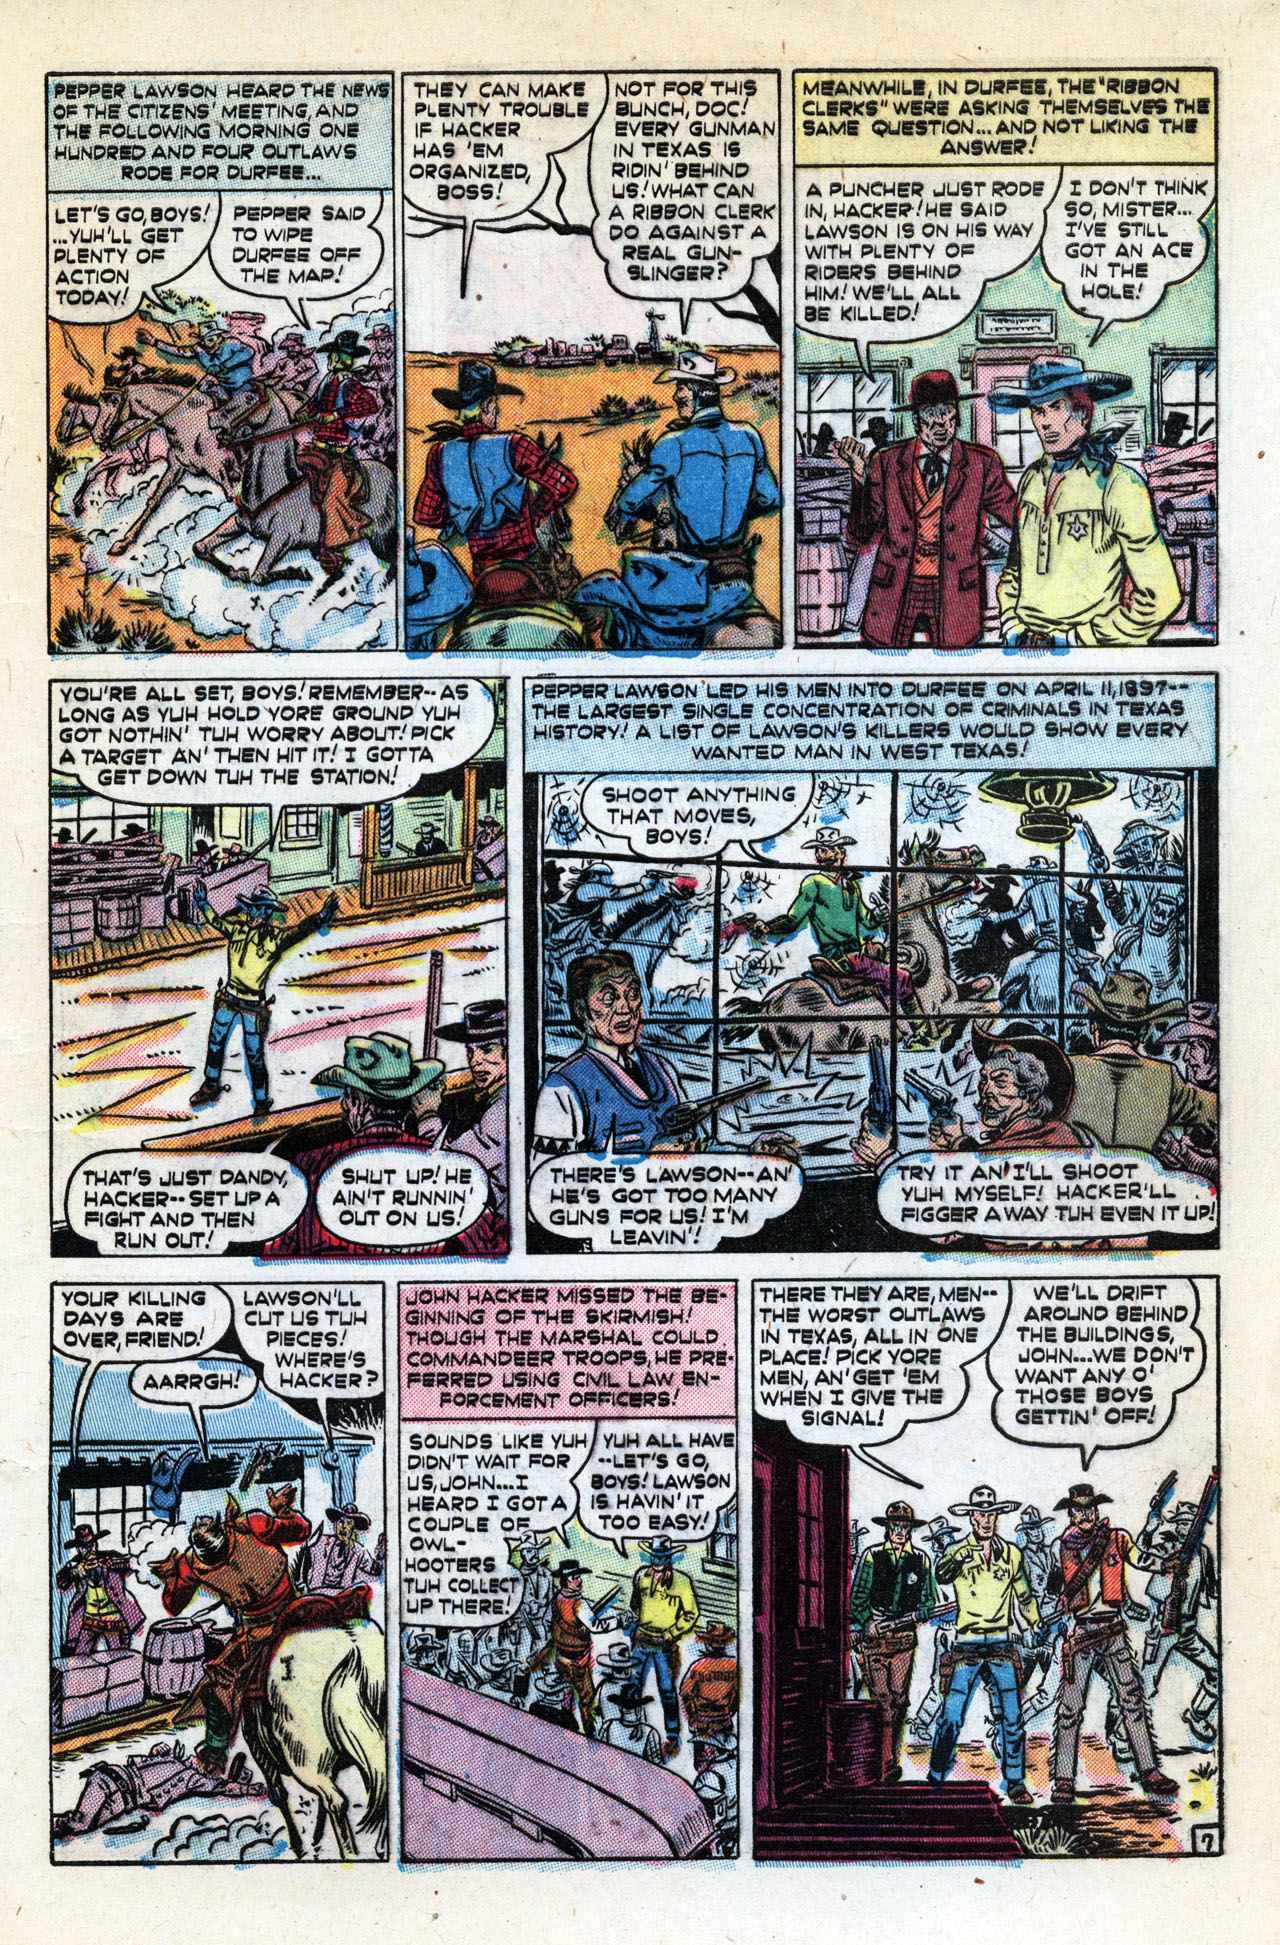 Western Outlaws and Sheriffs 61 Page 8